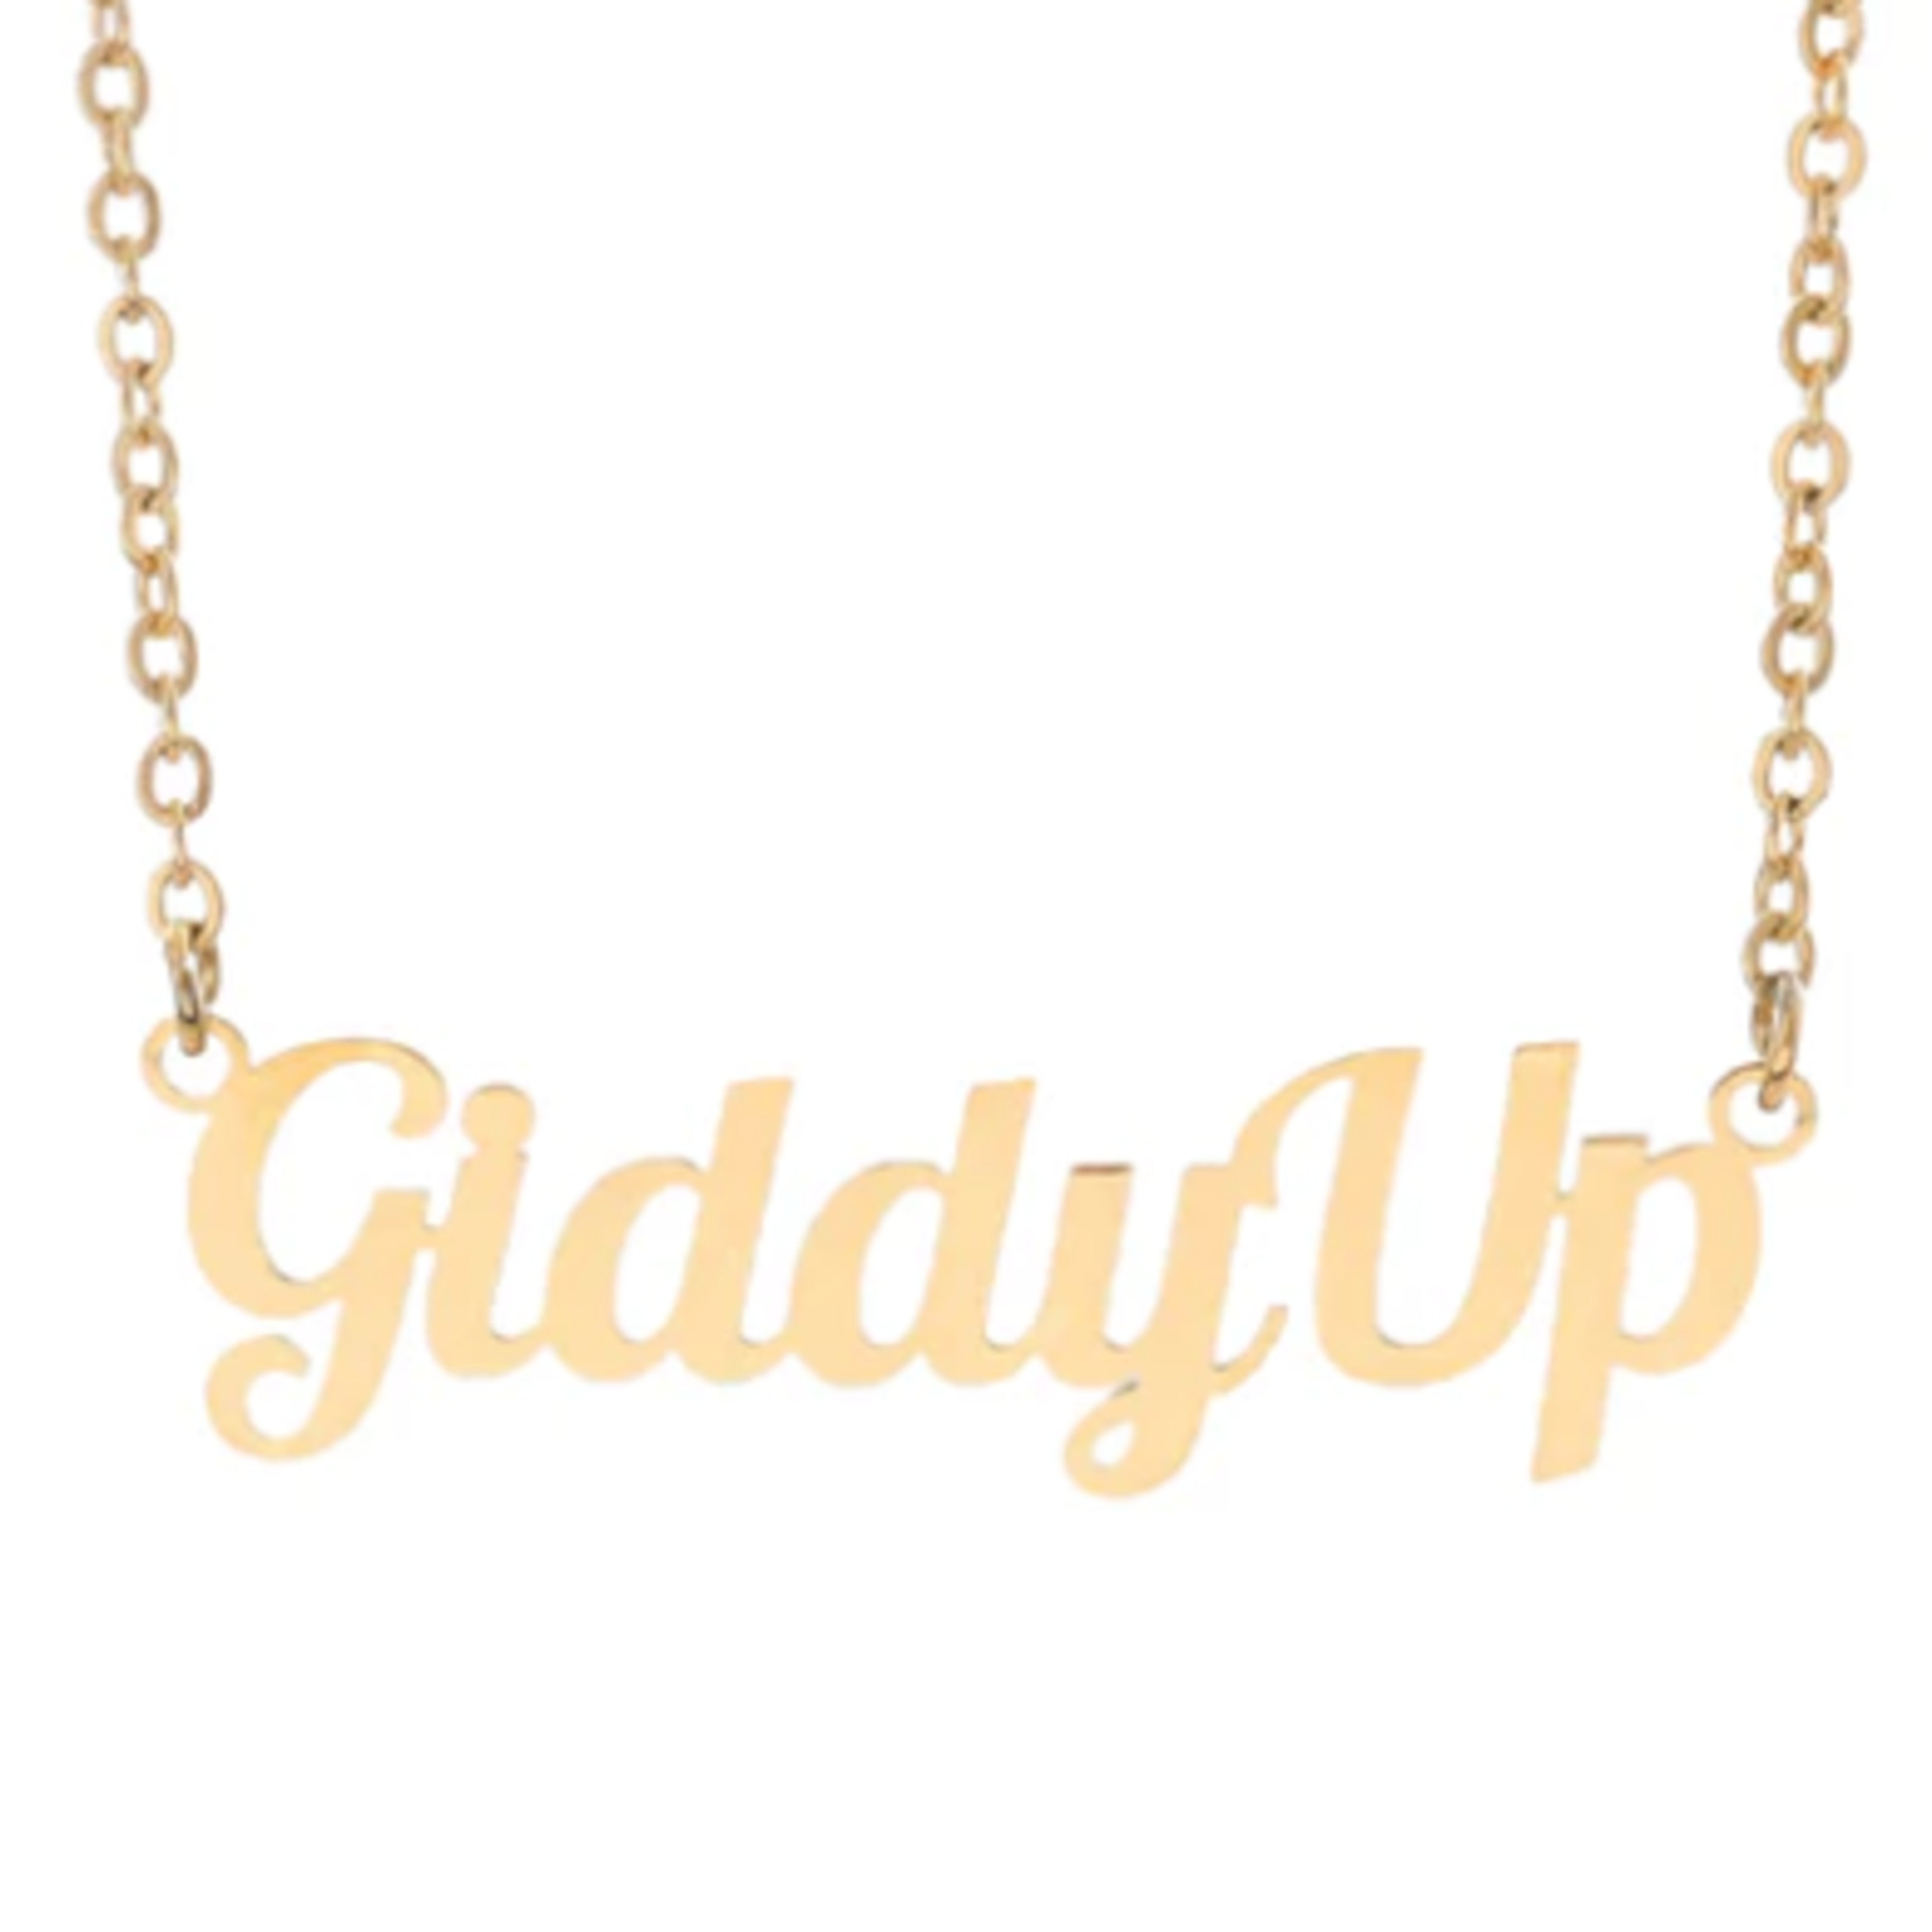 Elcee Nameplate Necklace